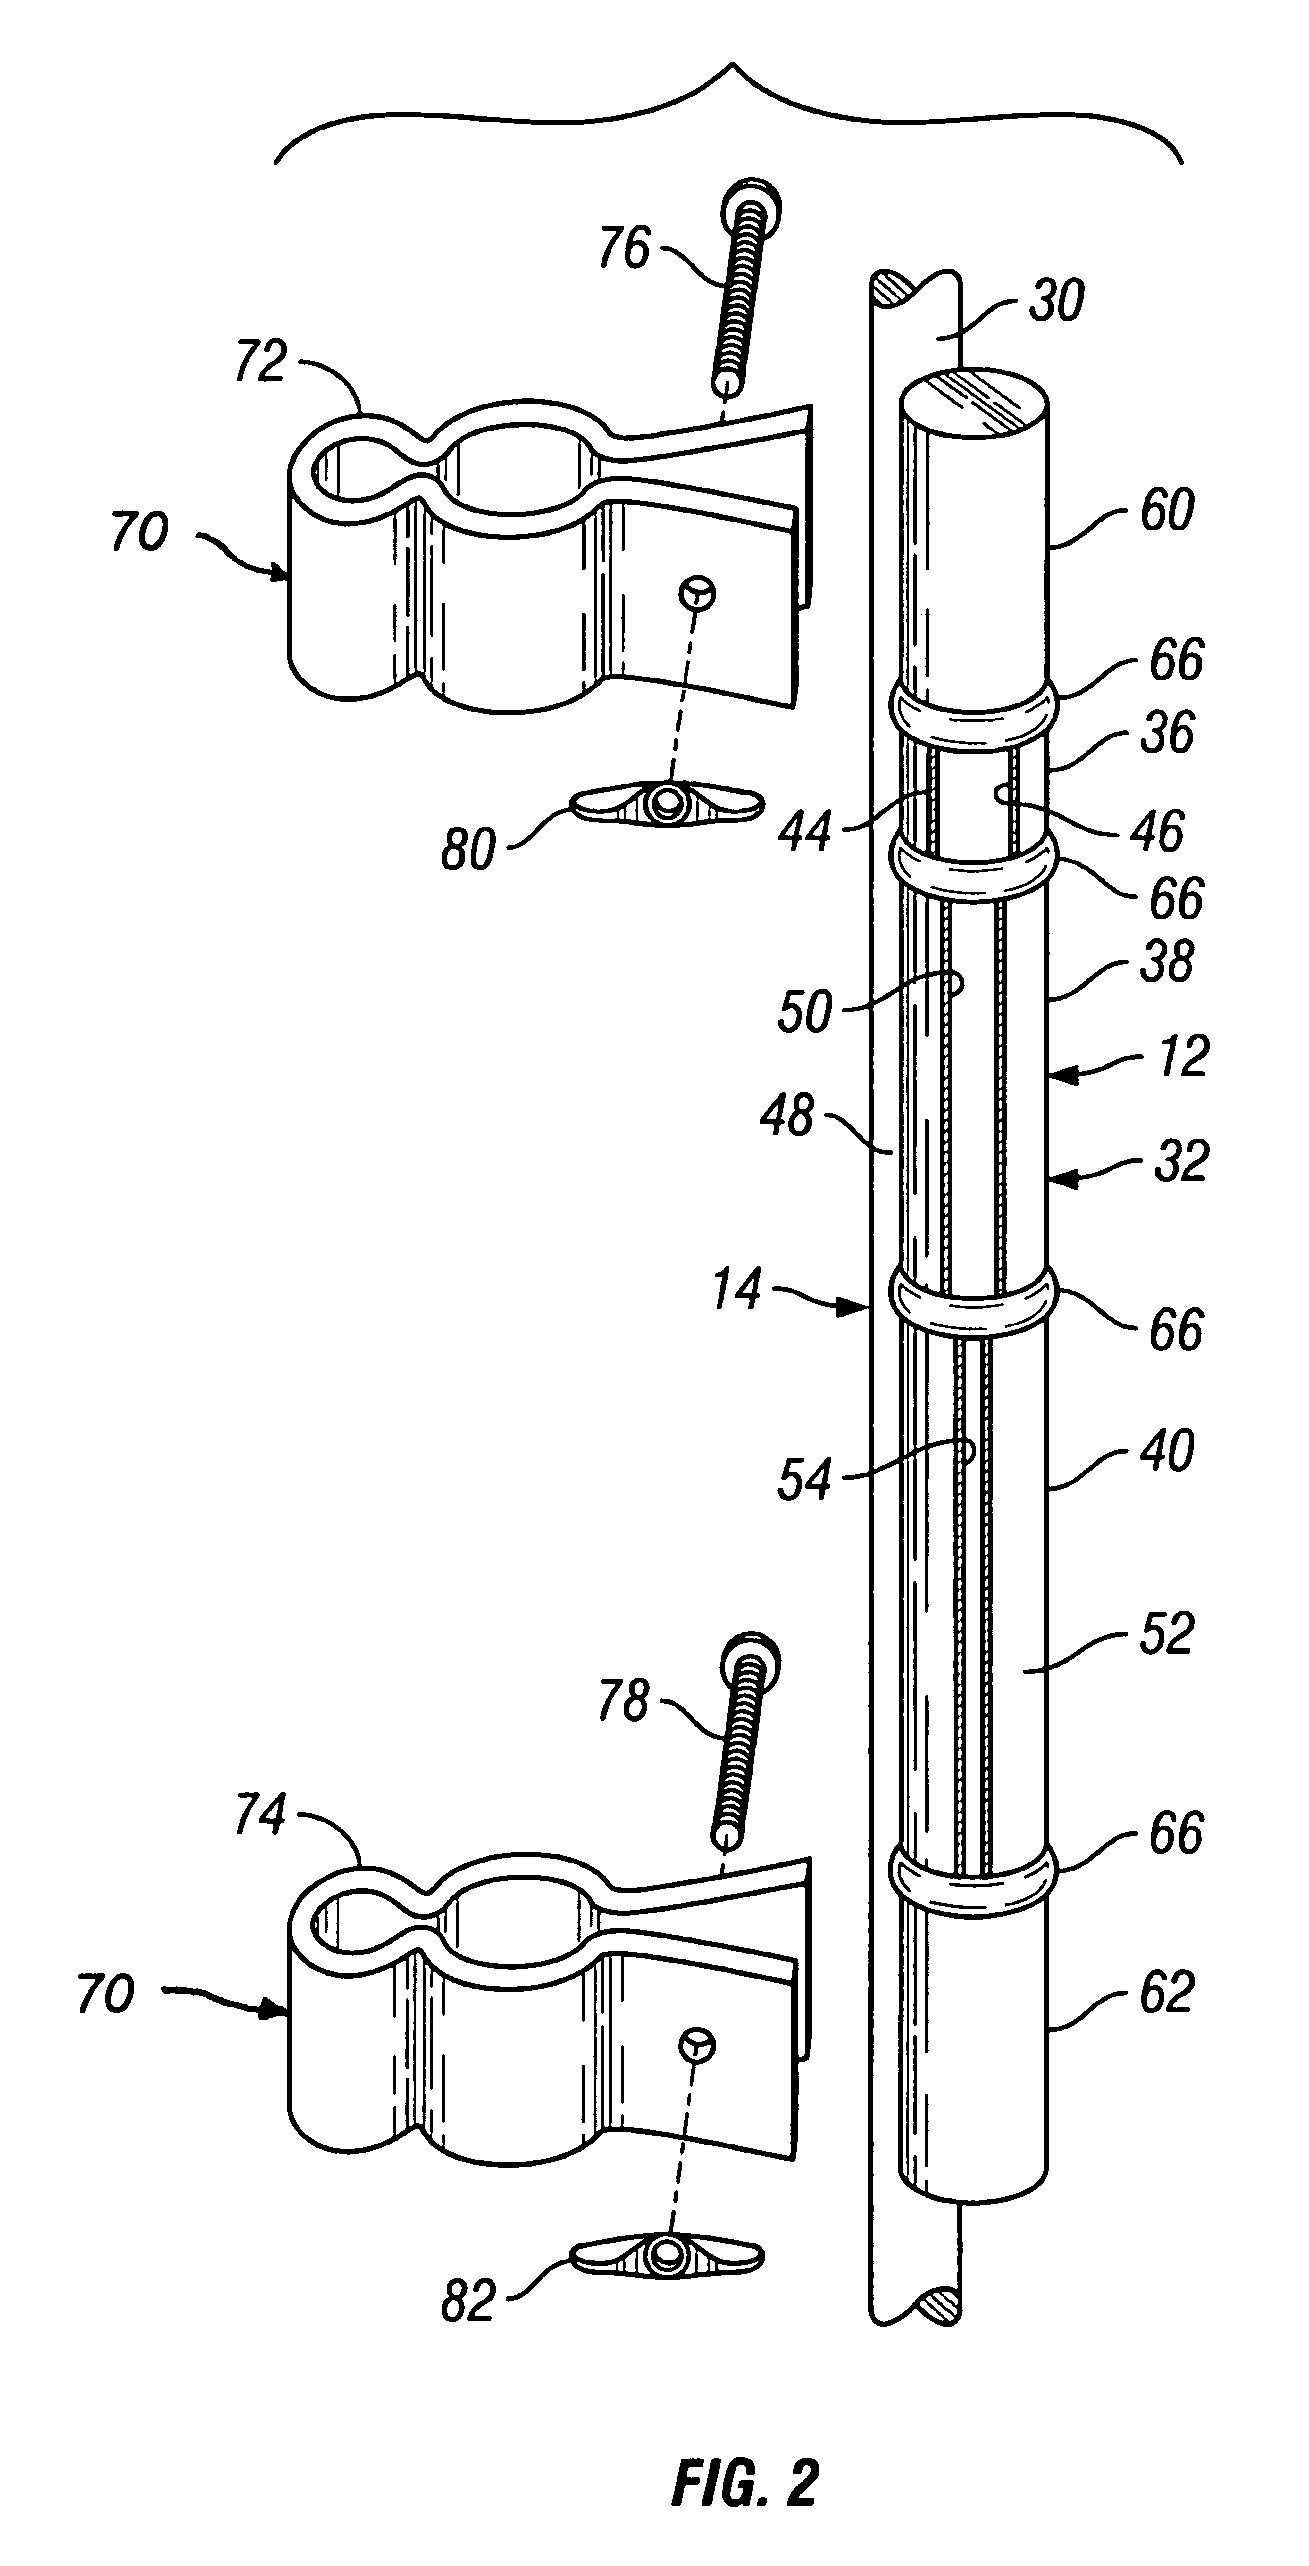 Apparatus for generating a complex acoustic profile representing the acceleration pattern of an object moving through a path of travel